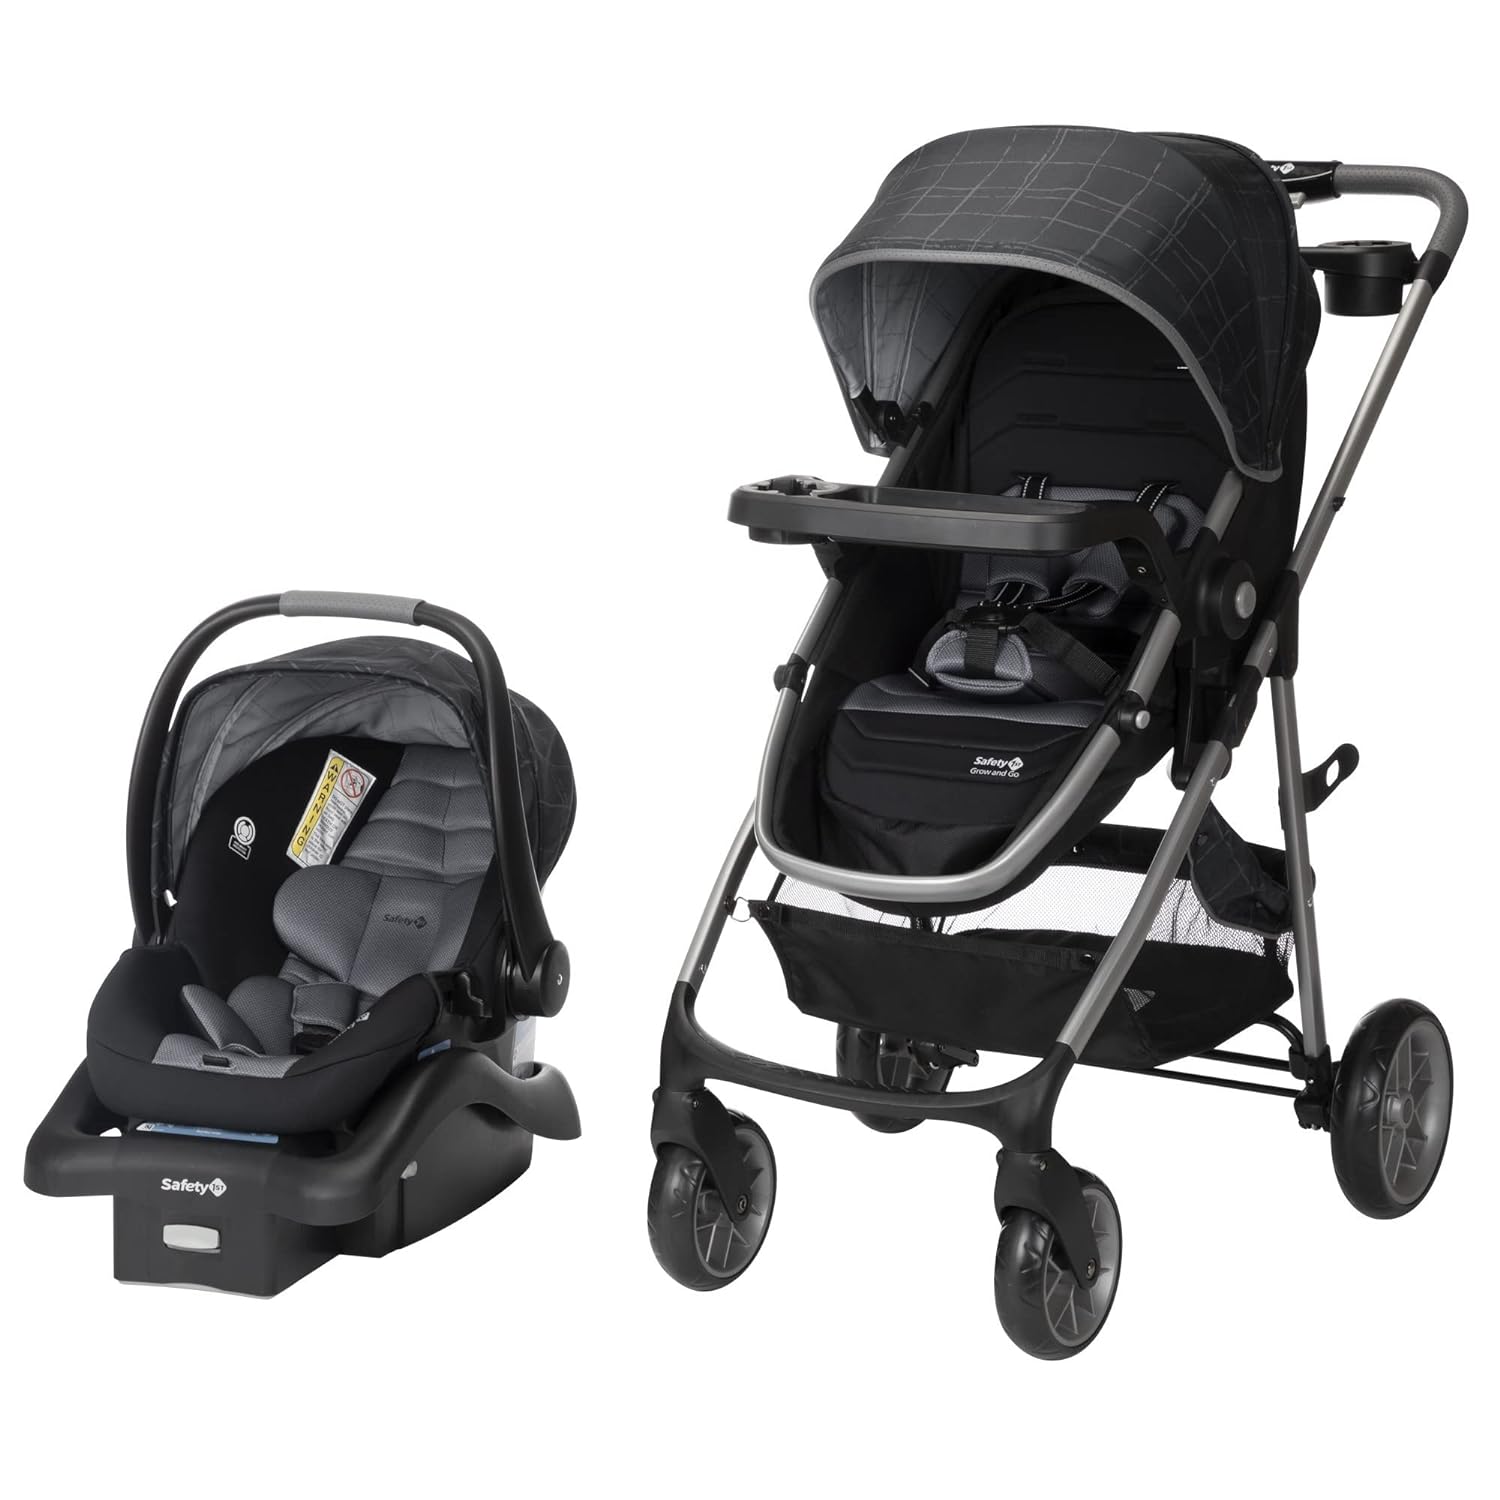 Safety 1st Deluxe Grow And Go Flex Travel System Review